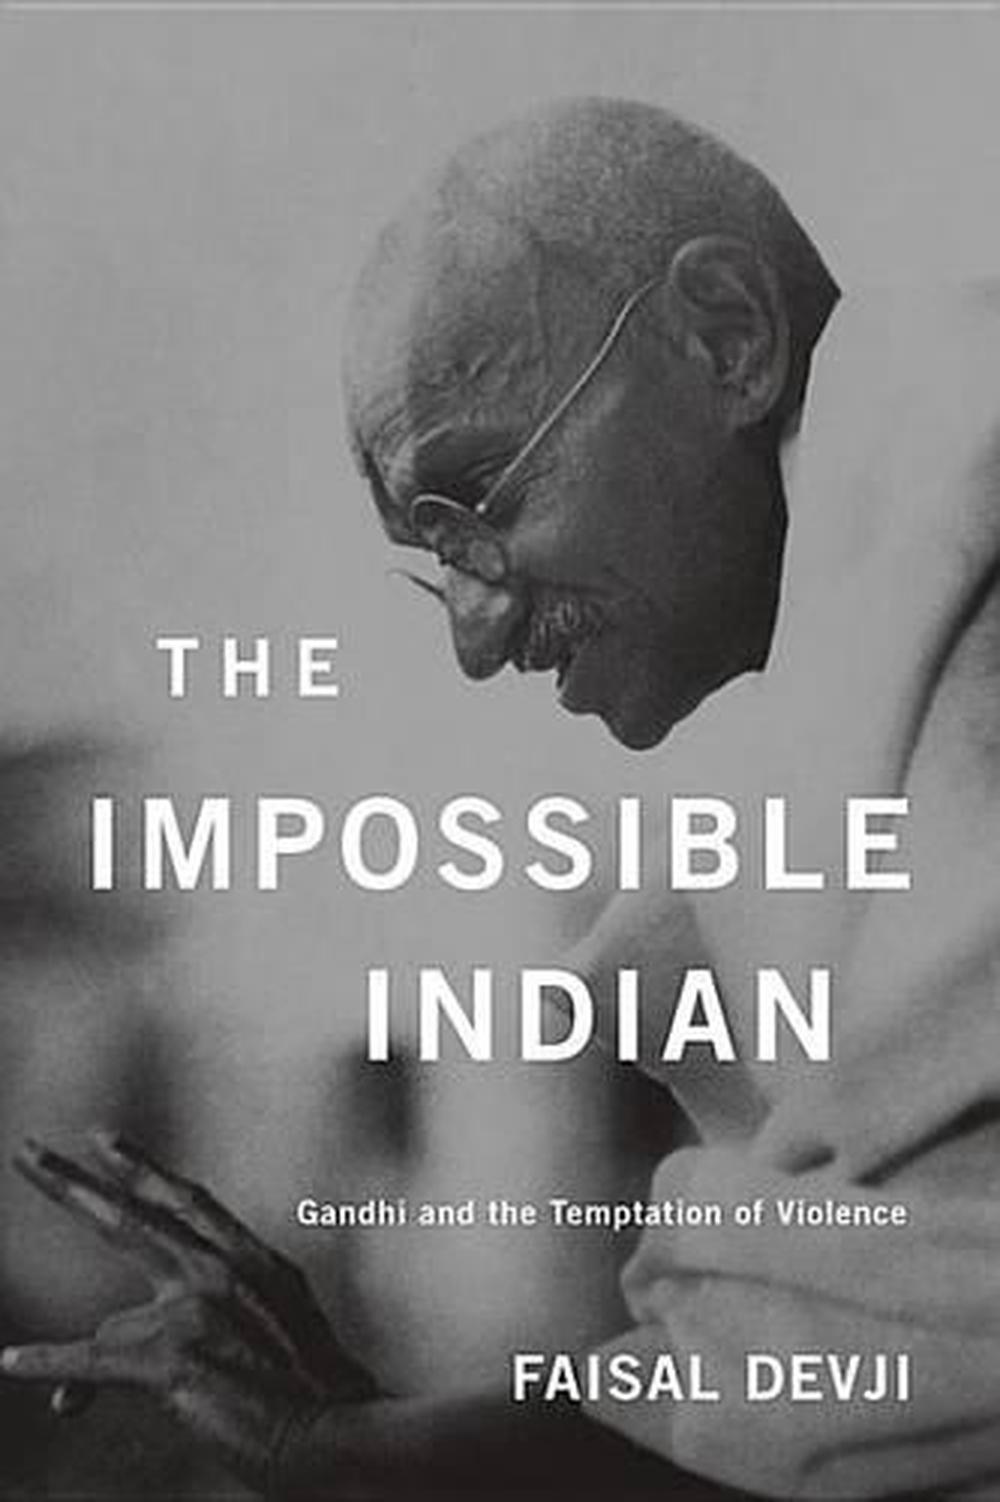 The Impossible Indian Gandhi and the Temptation of Violence by Faisal